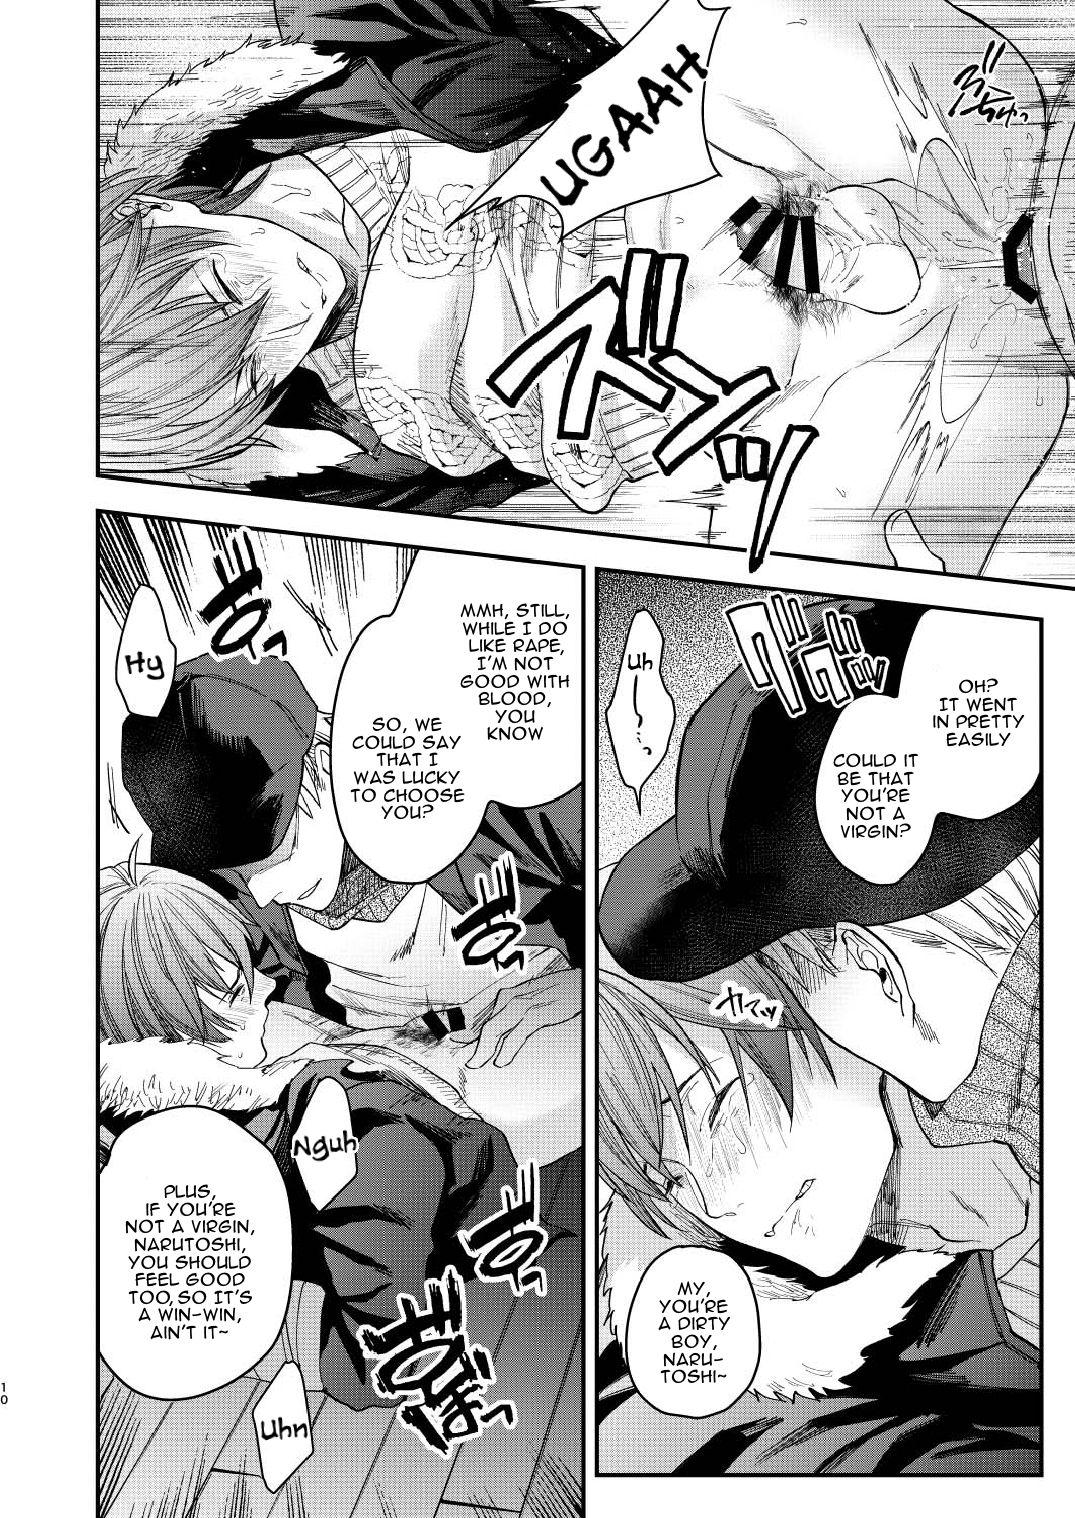 Teenager Souyuu Ganbou no Hanashi | A Story About That Kind of Desire - Original Female Domination - Page 8